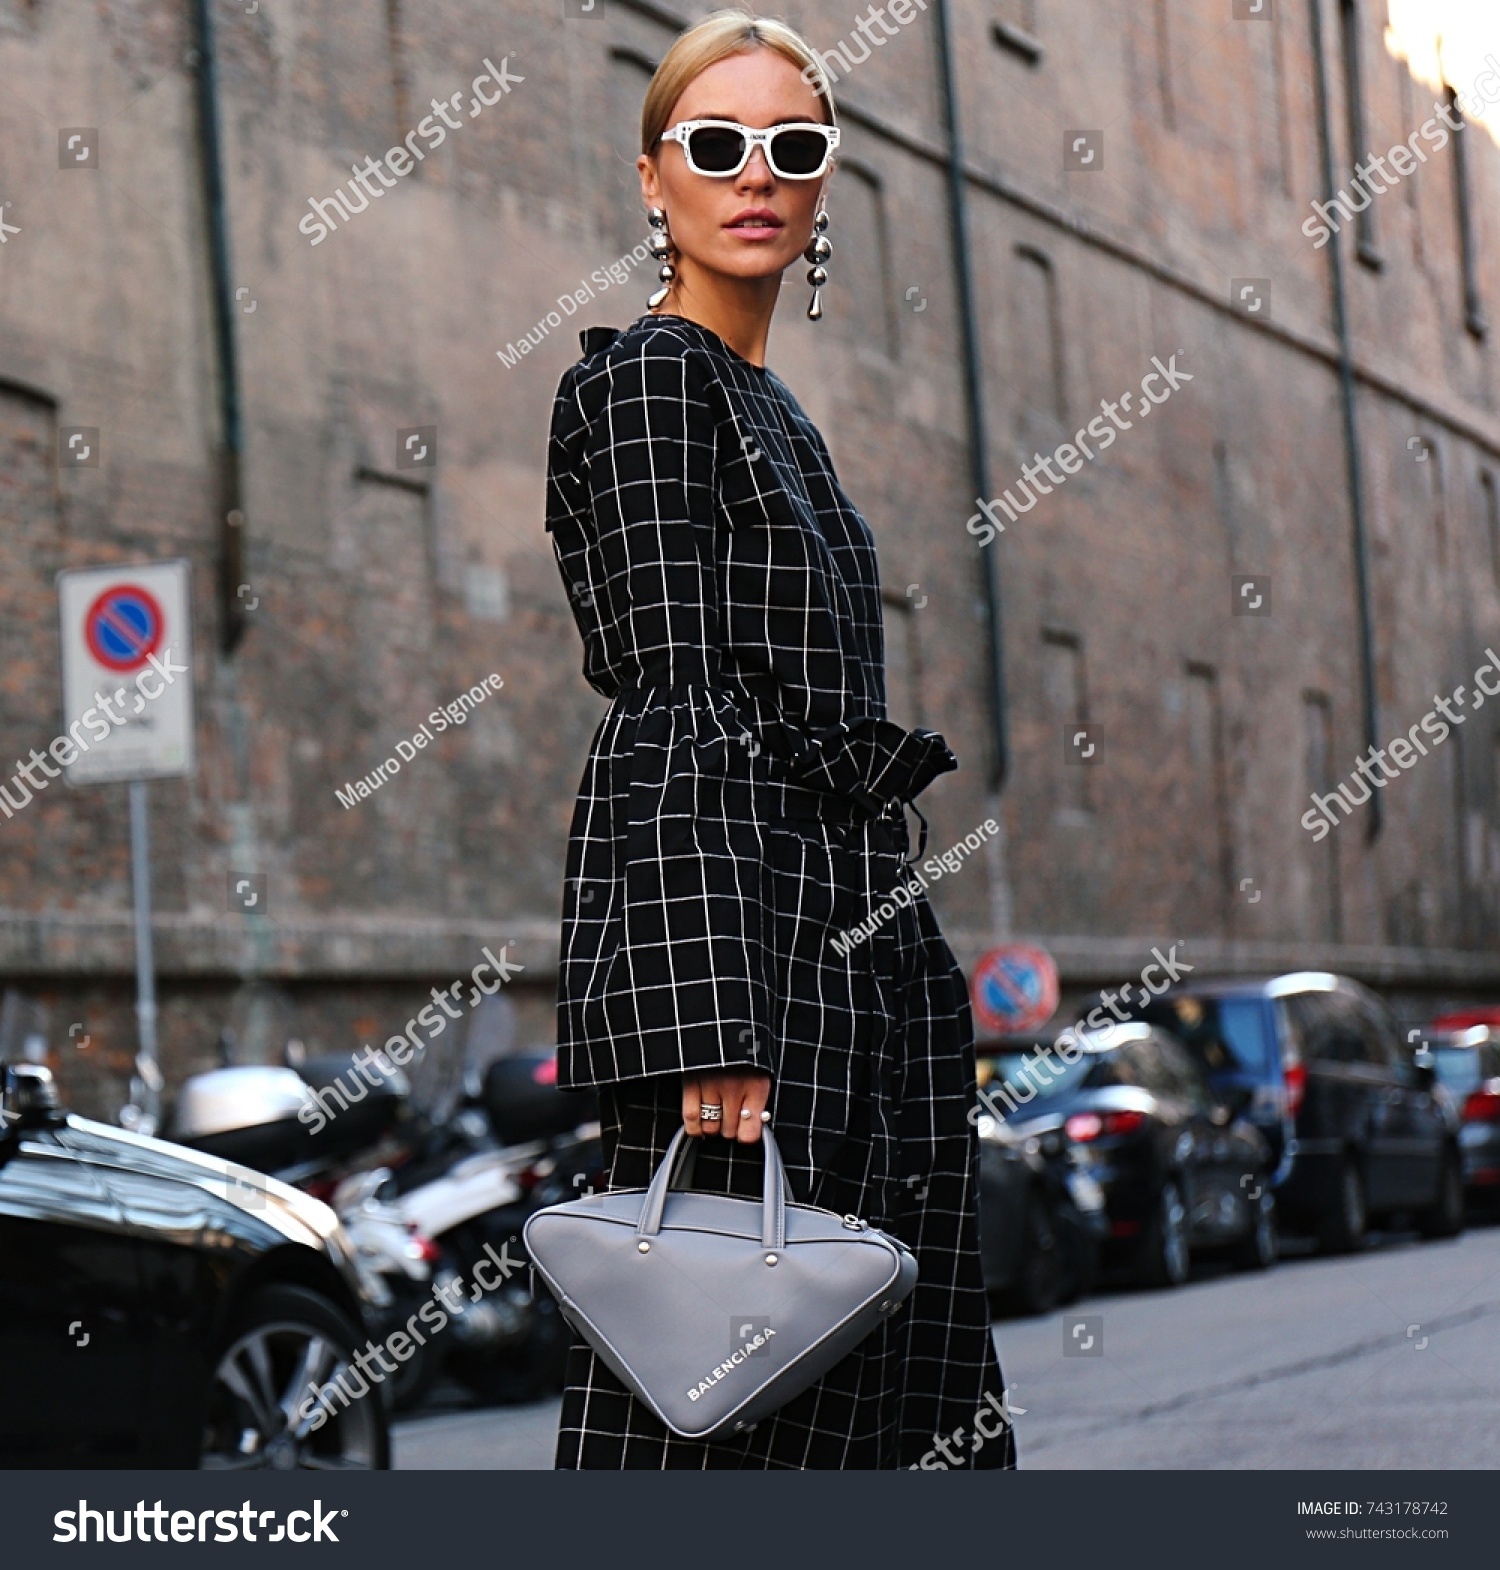 661,216 Fashion week Images, Stock Photos & Vectors | Shutterstock